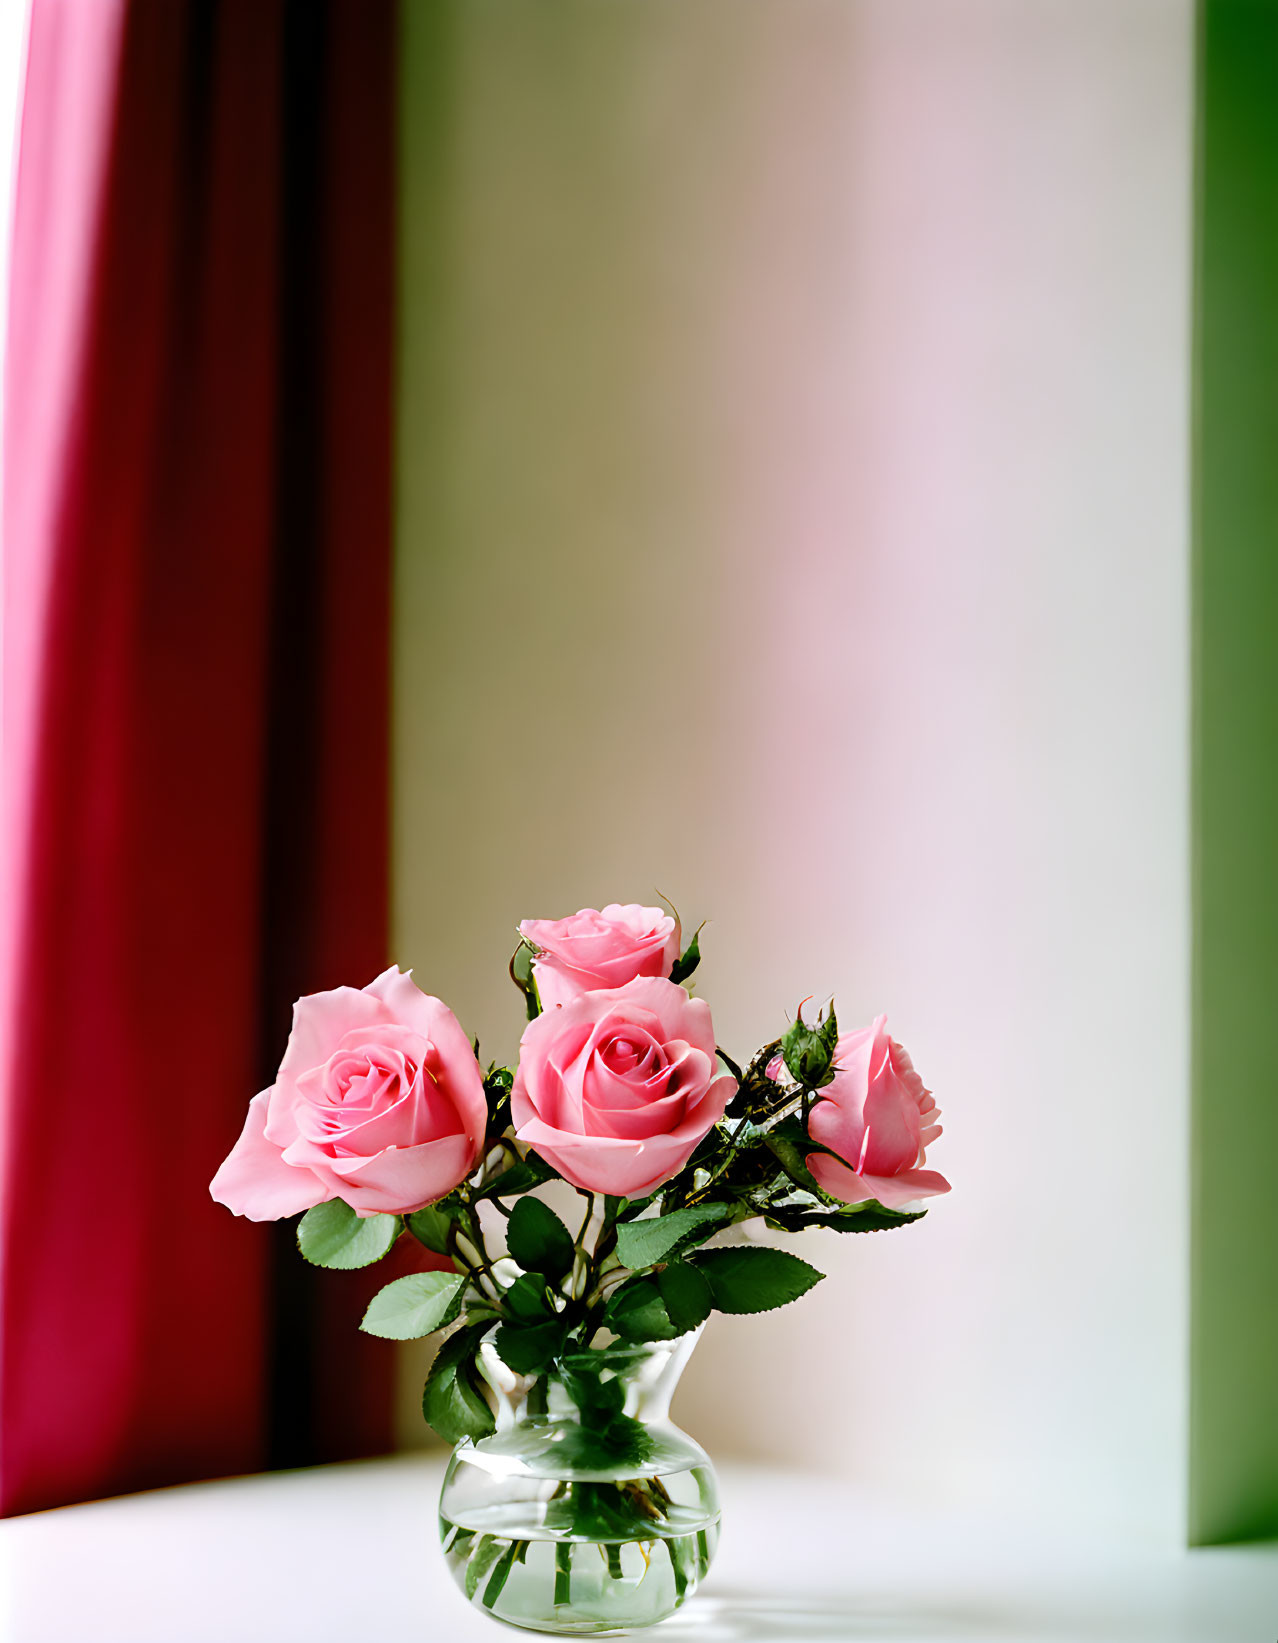 Glass Vase with Pink Roses on Table with Red Curtain and White Wall